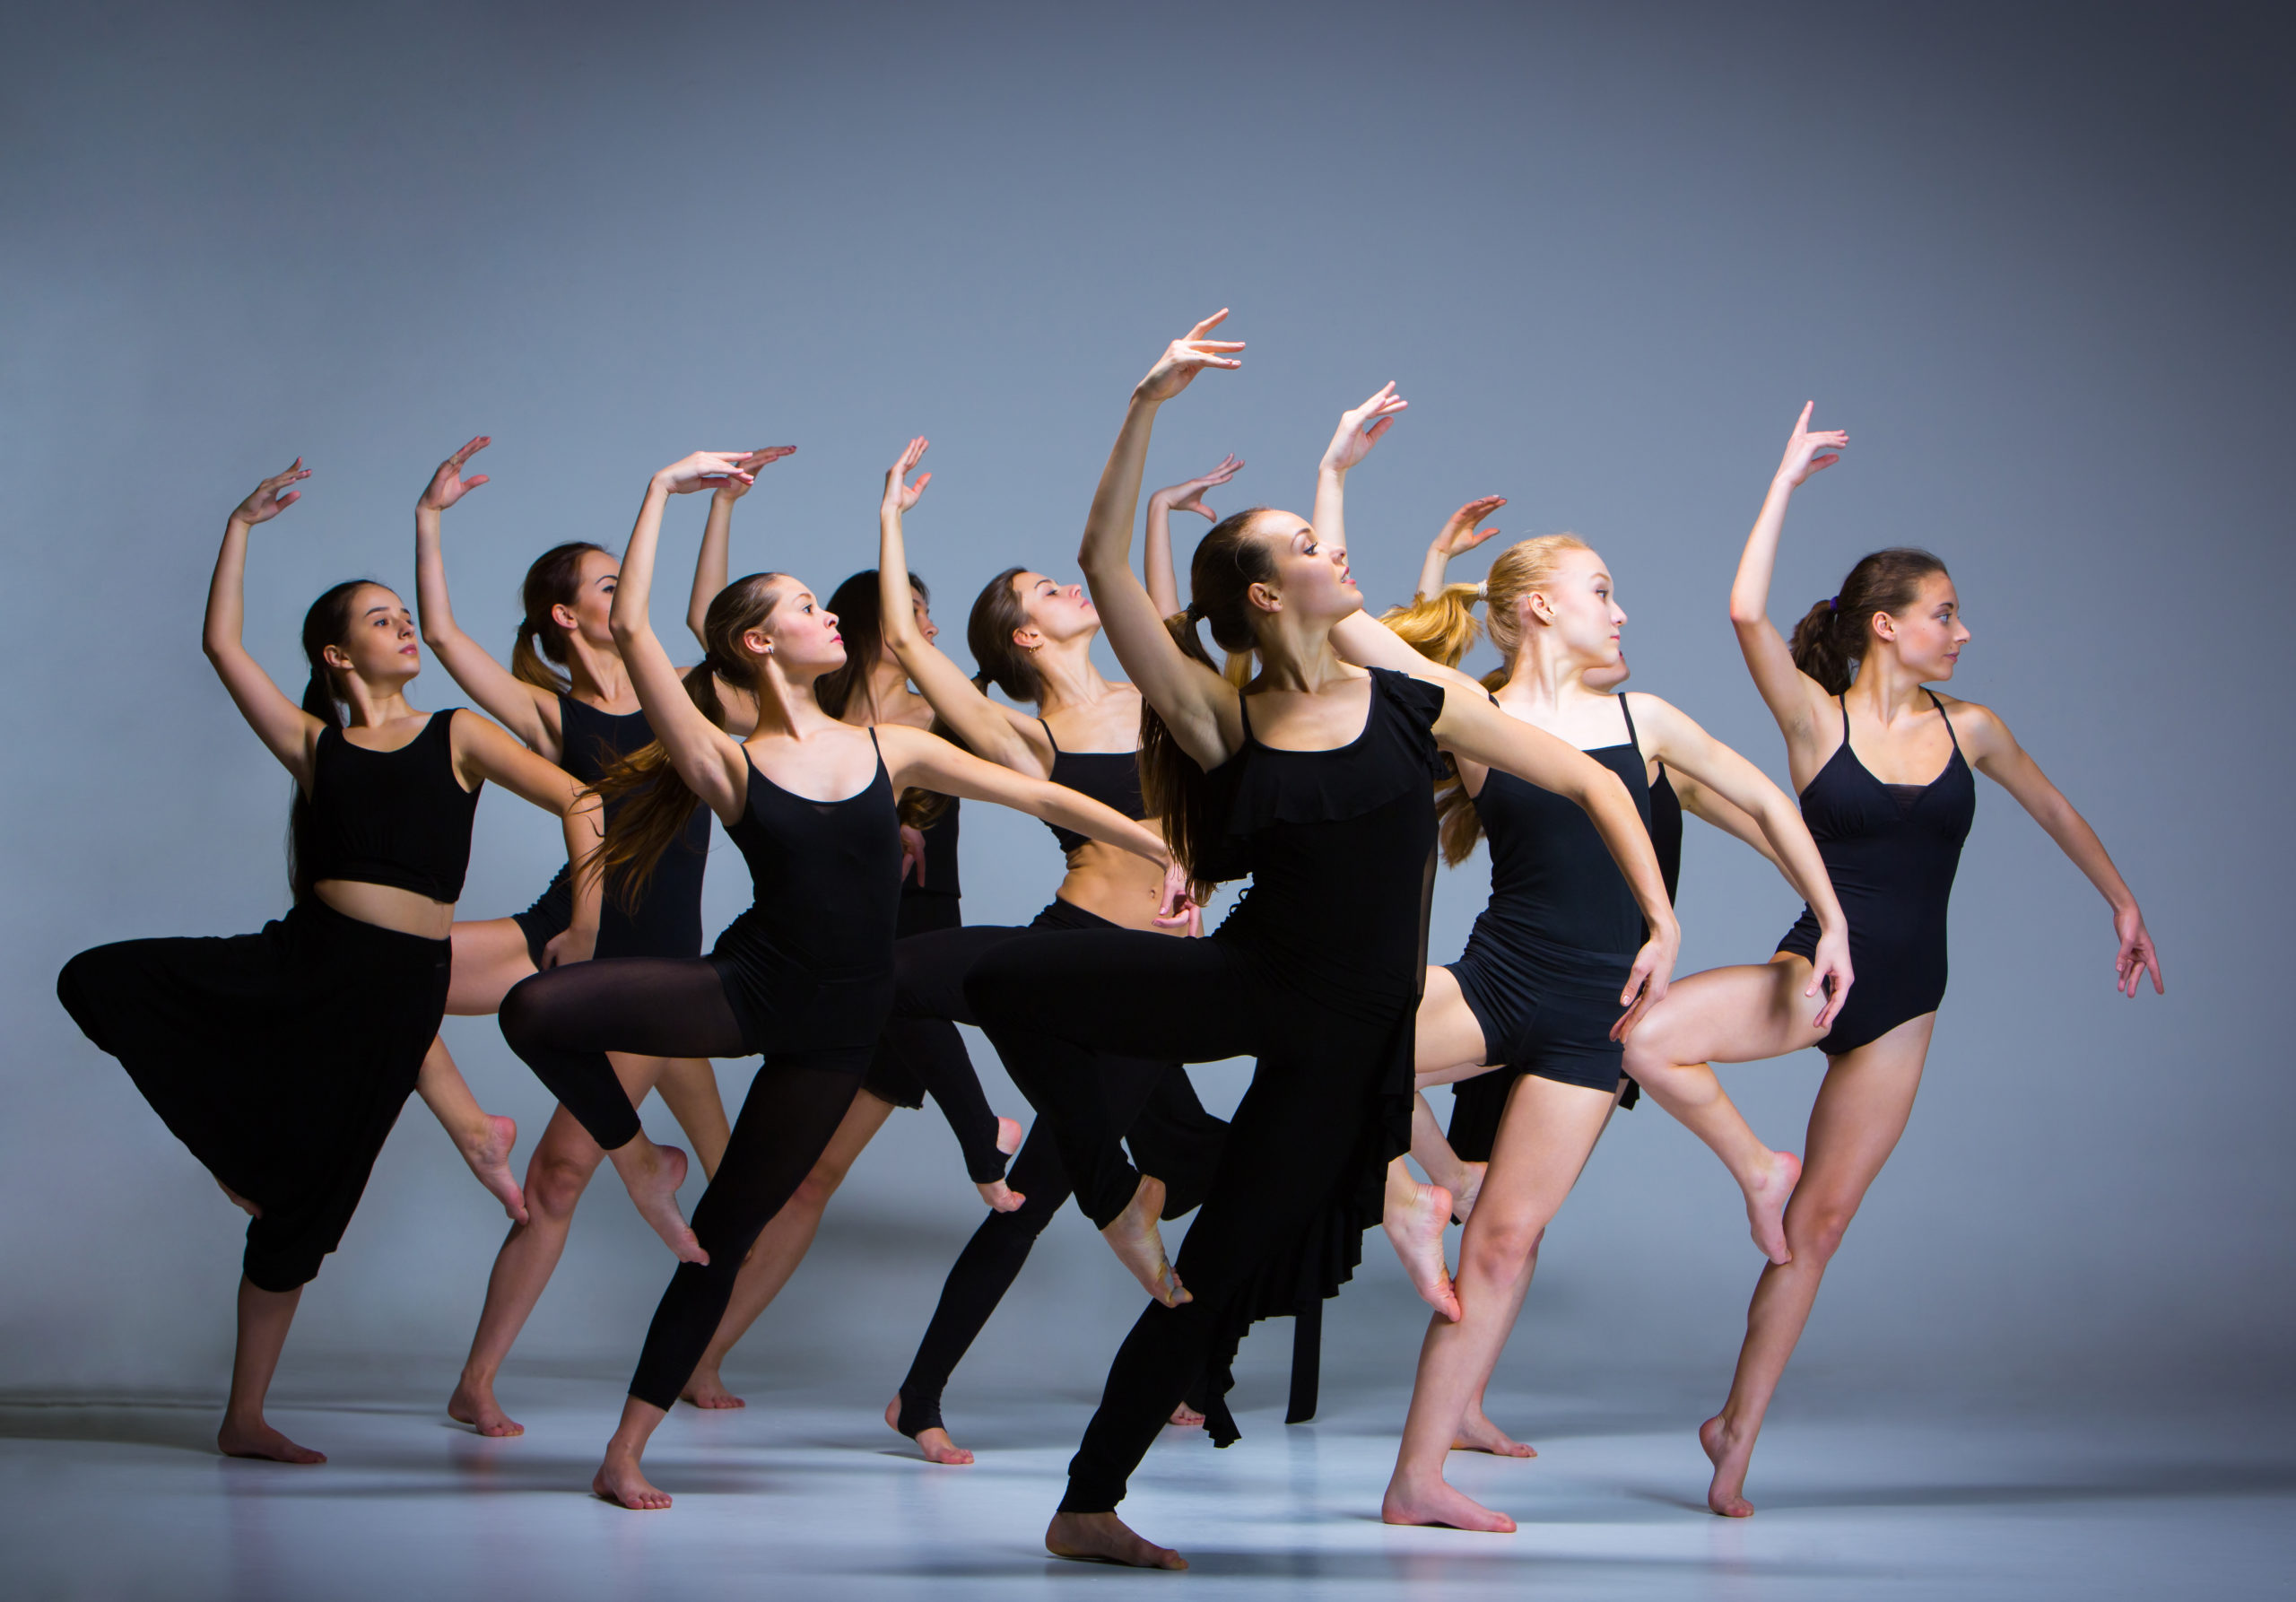 Group of modern ballet dancers dancing in front of a gray background